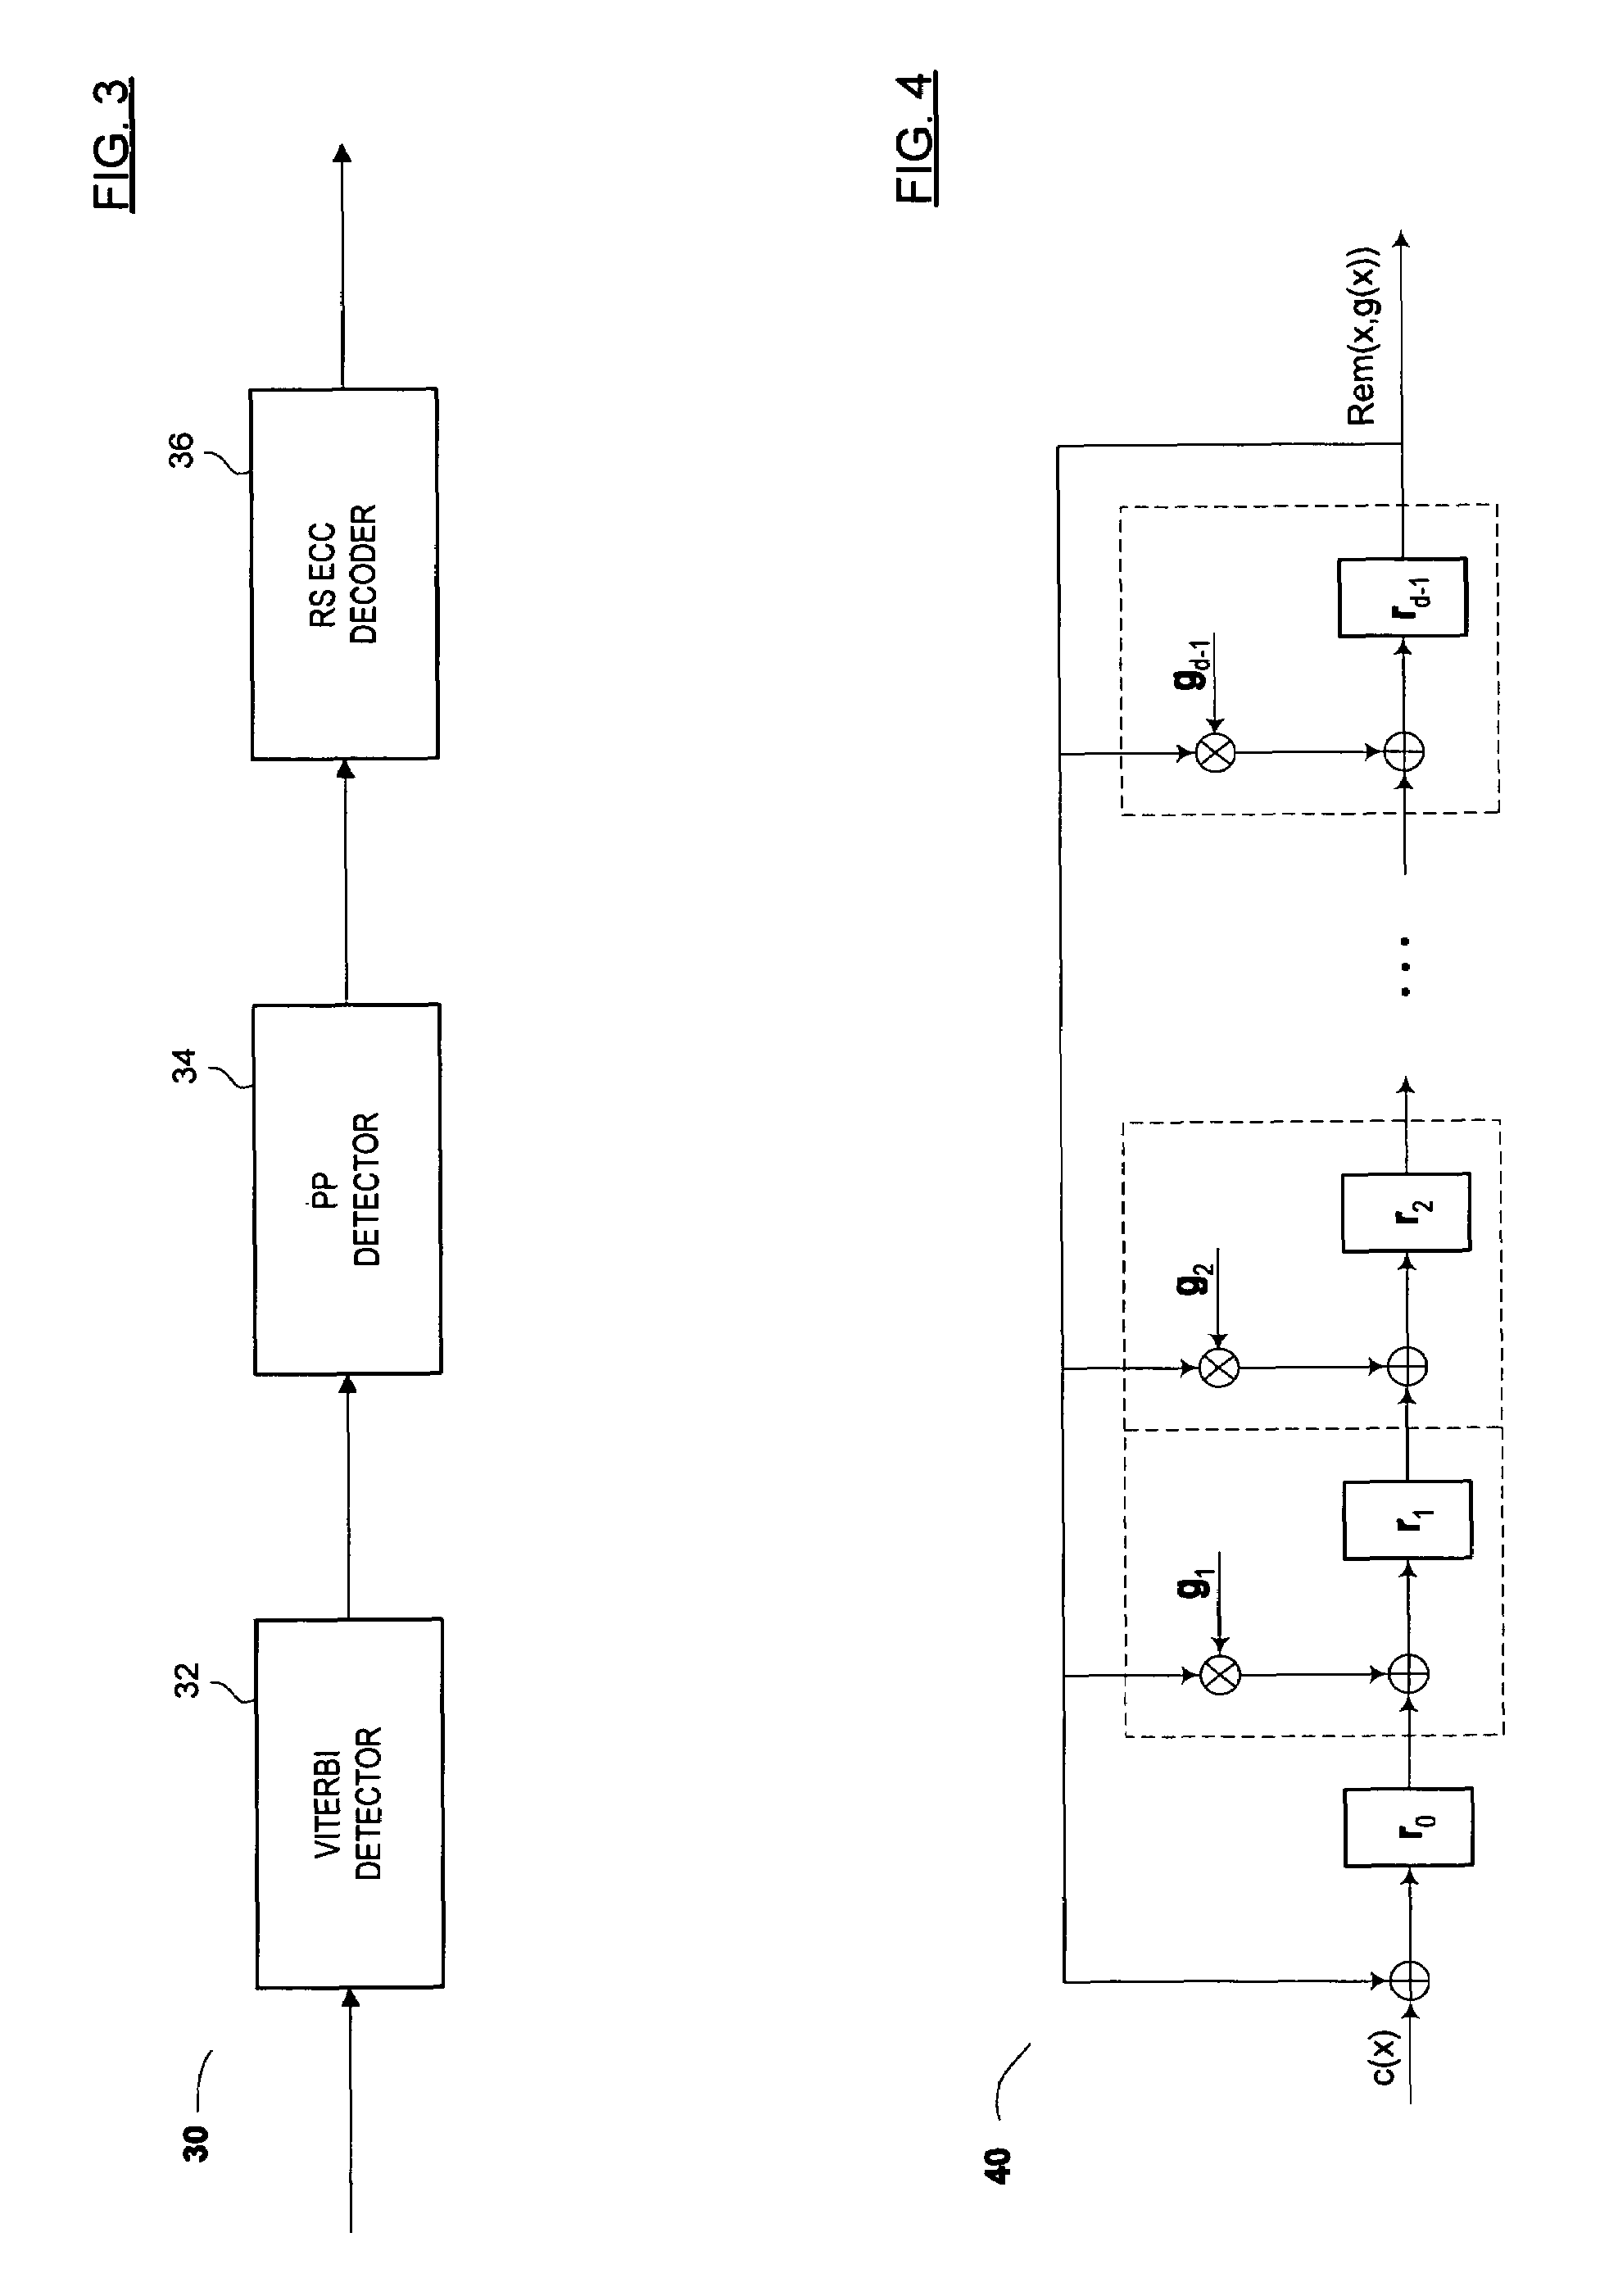 Methods and algorithms for joint channel-code decoding of linear block codes